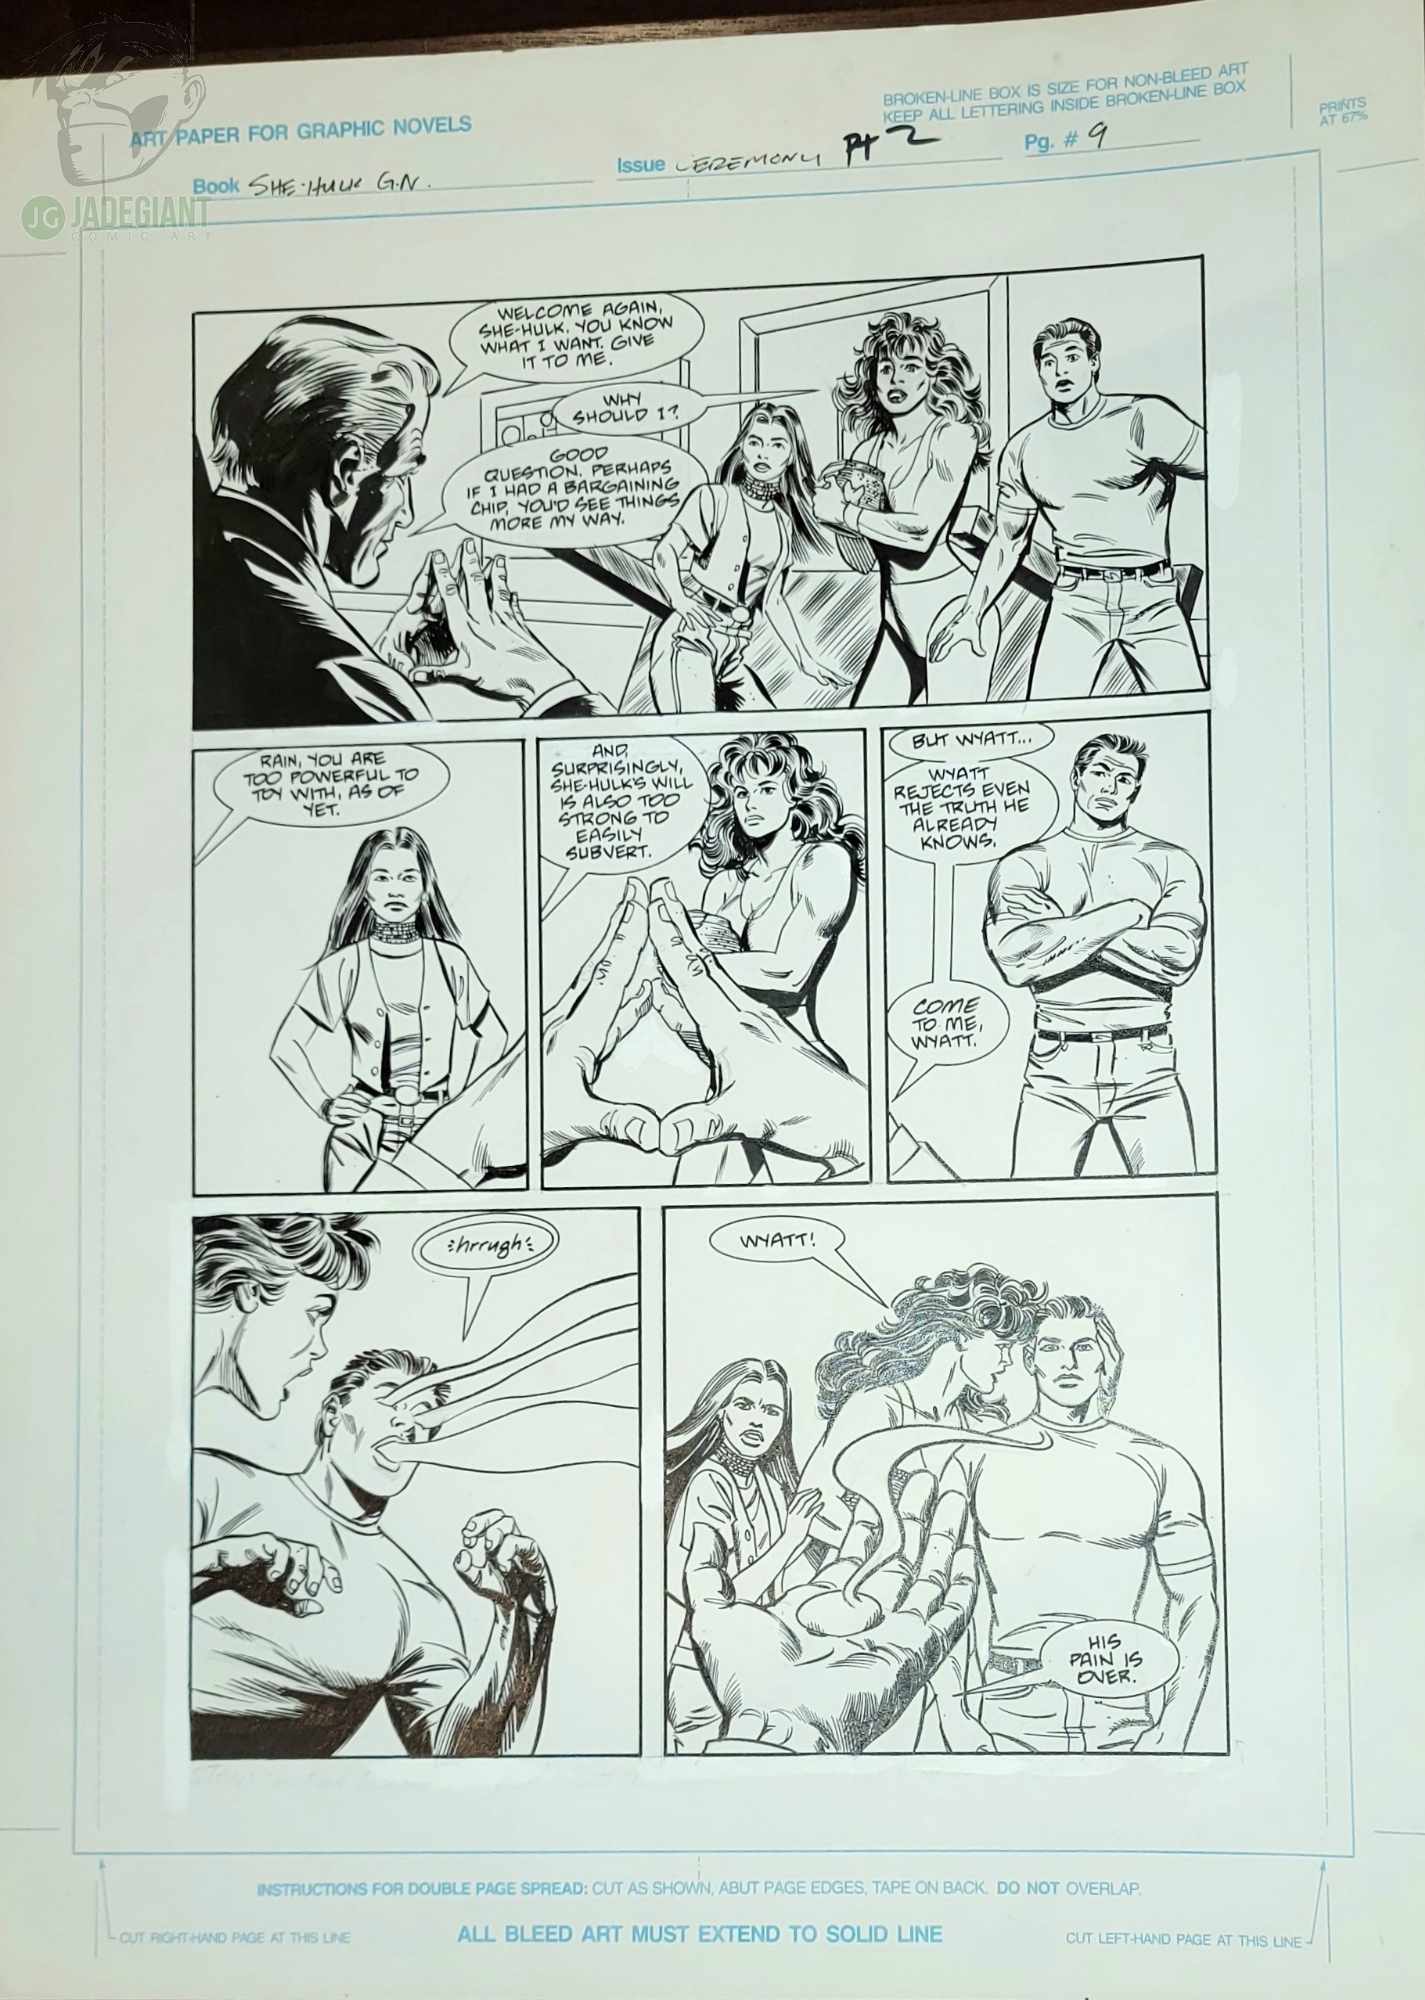 1990 She Hulk Ceremony Graphic Novel Vol 1 #2 page 9 by June Brigman and Stan Drake Comic Art